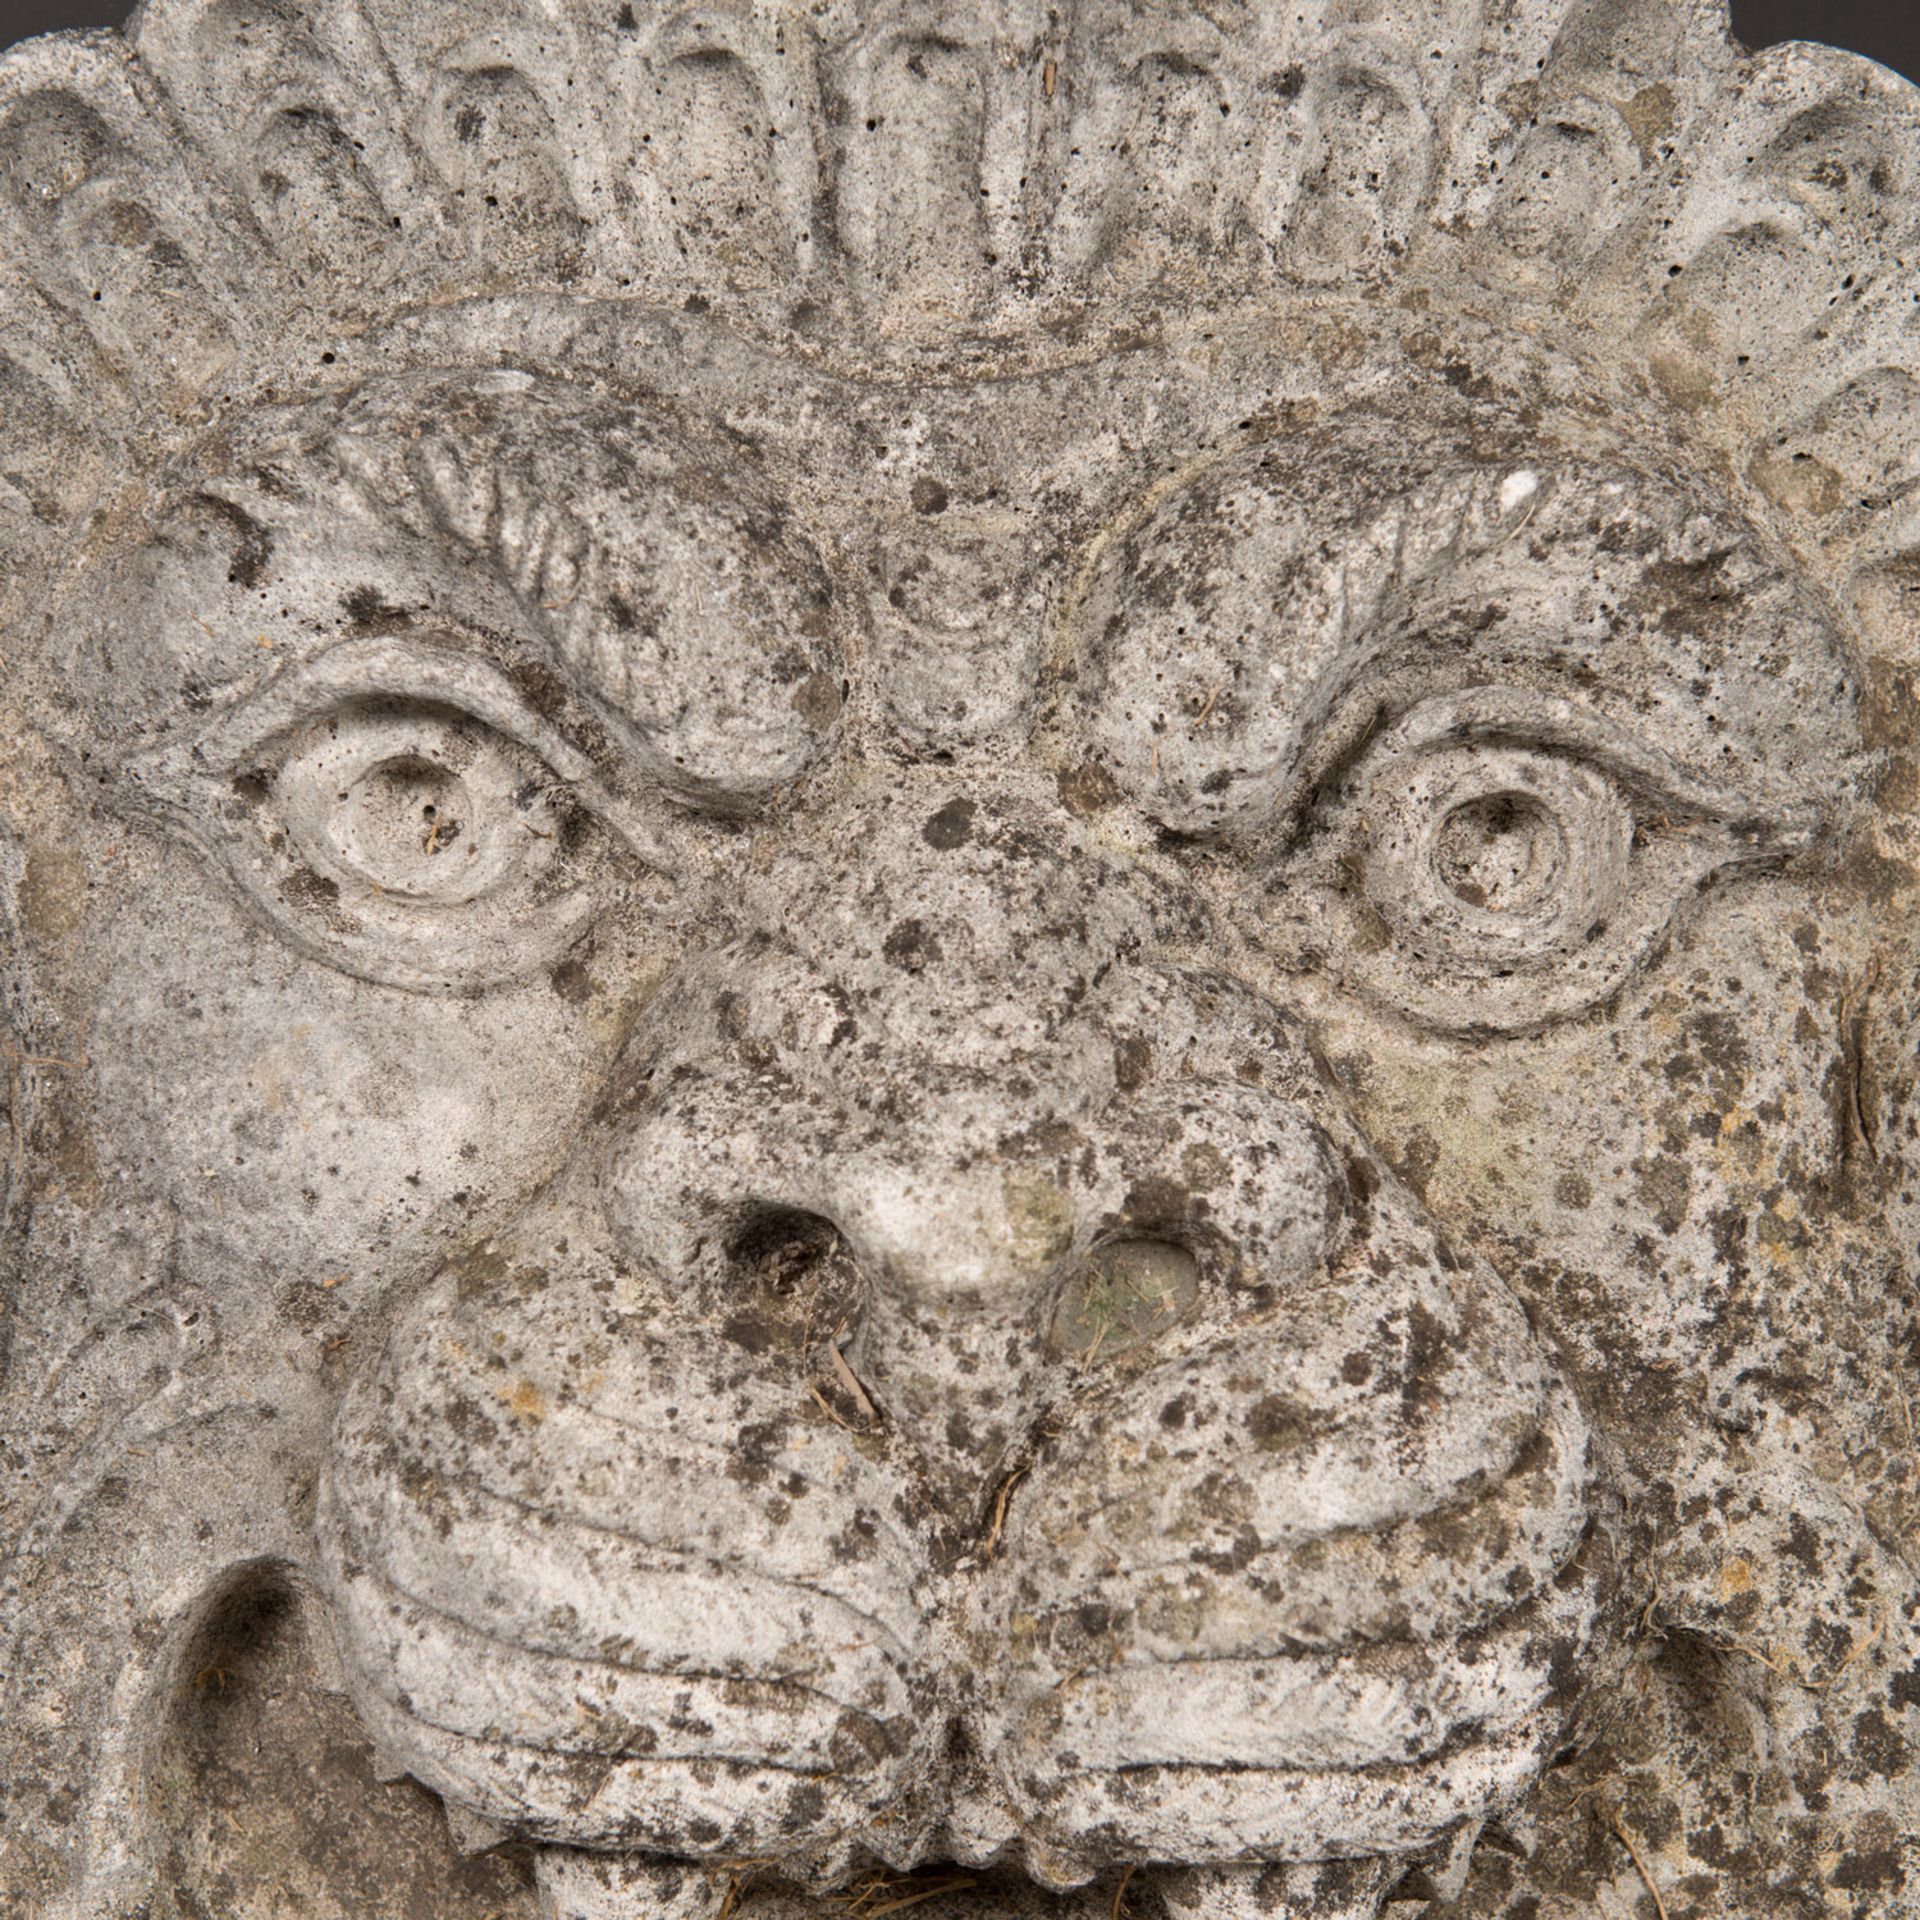 Grotesque Mask - Image 3 of 3